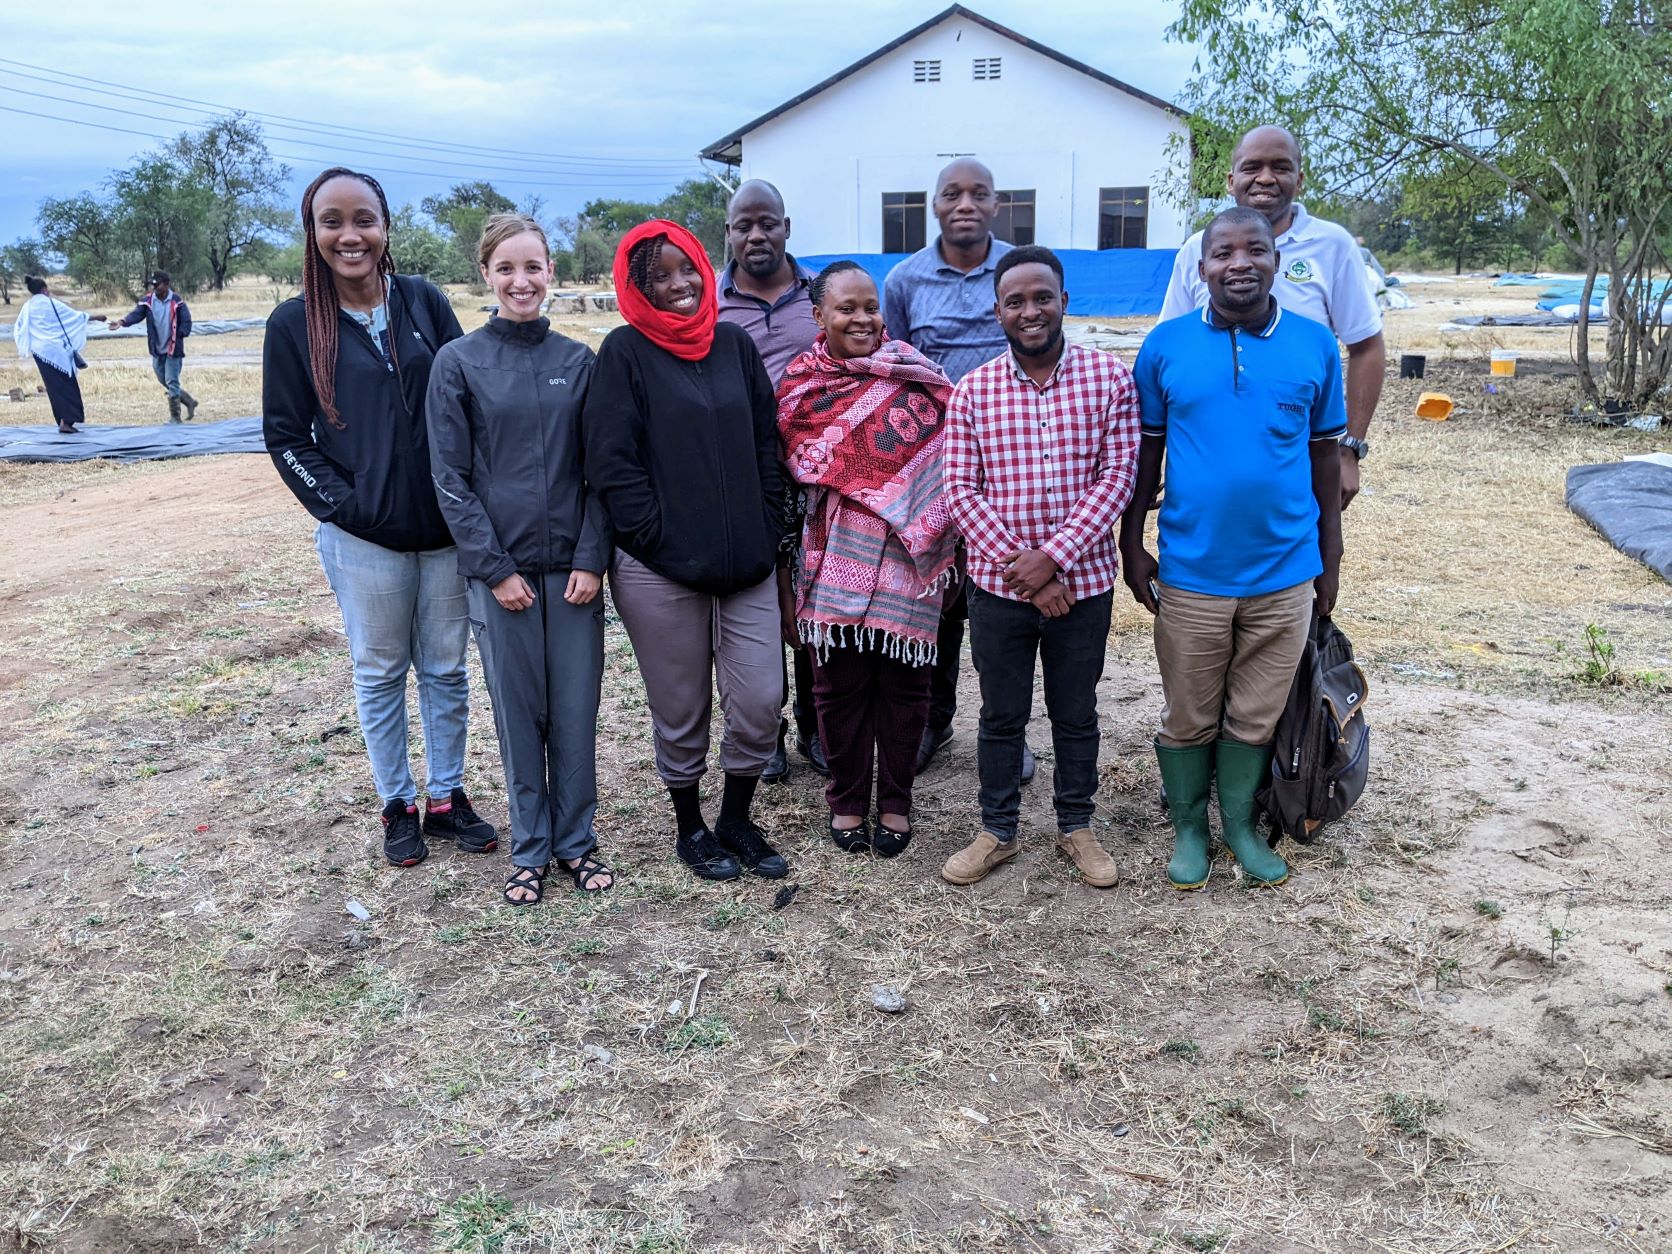 Alix (second from left) with her research group in Tanzania.